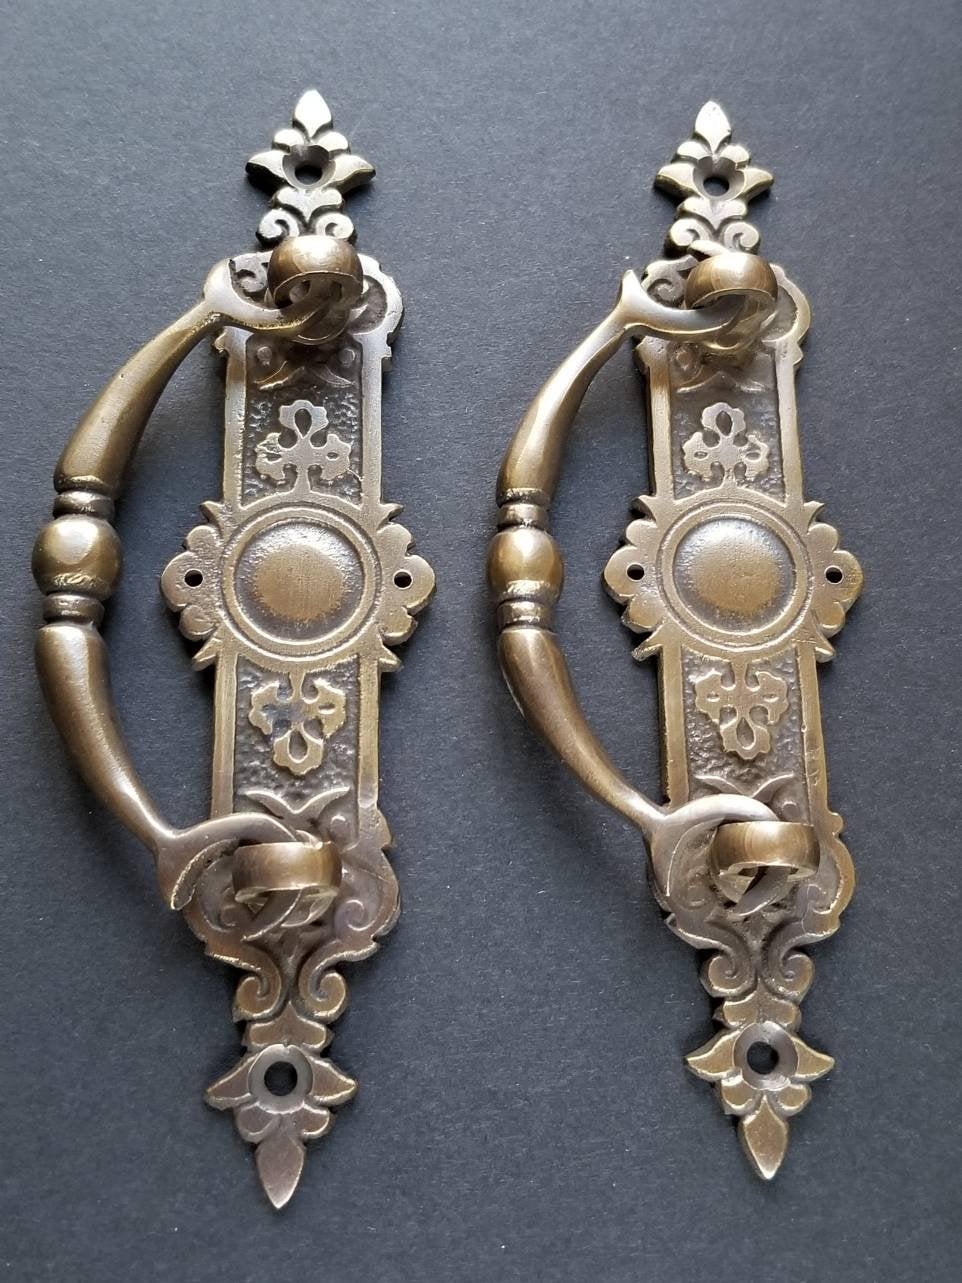 2 East Lake Victorian Antique-Style Solid Brass Handles Pulls Hardware 5-1/4"w #H44